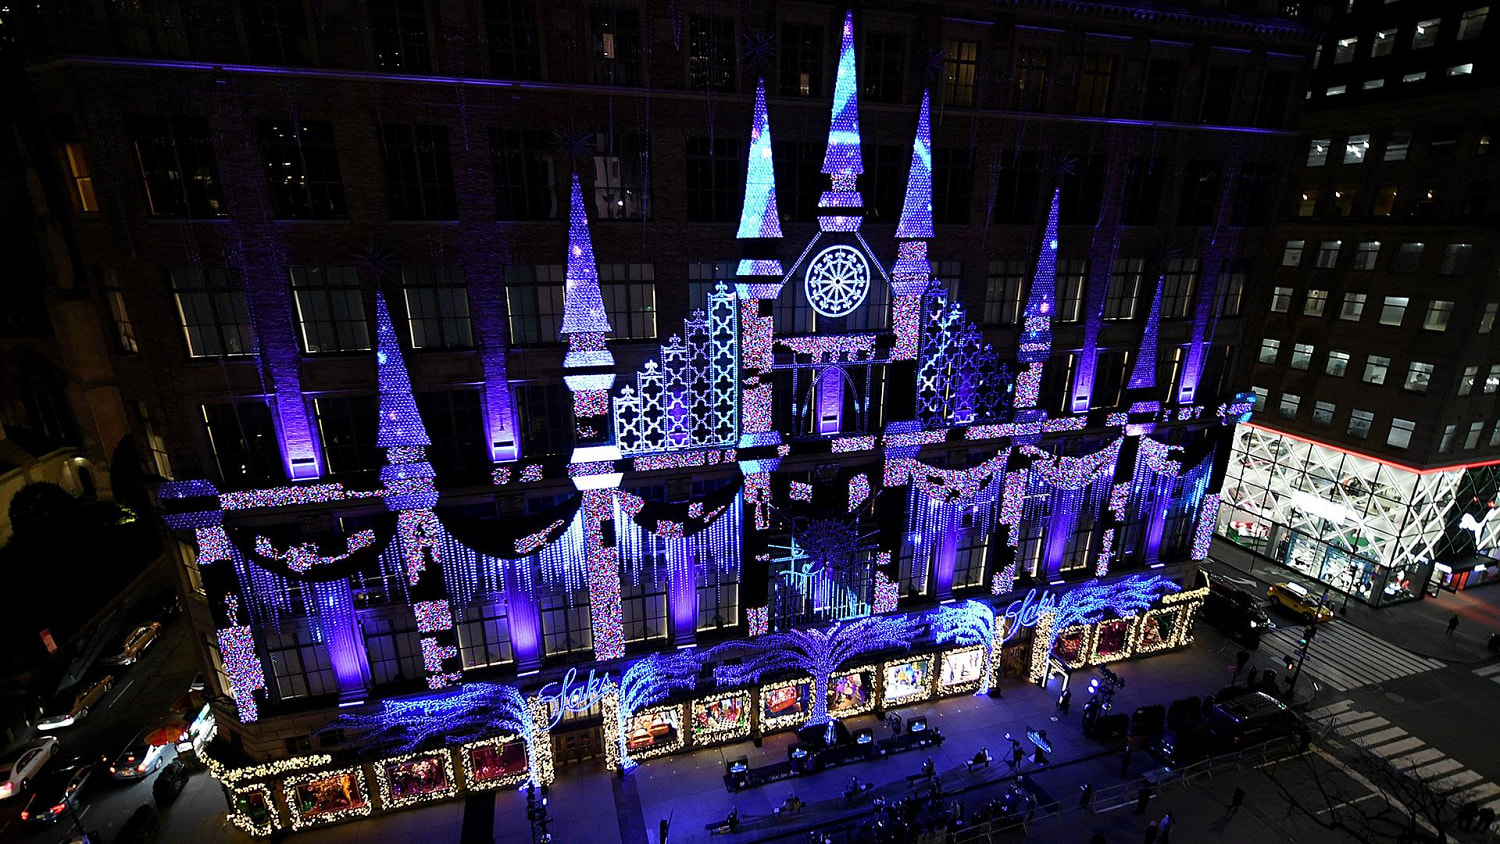 Watch: Saks Fifth Avenue unveils annual holiday light show